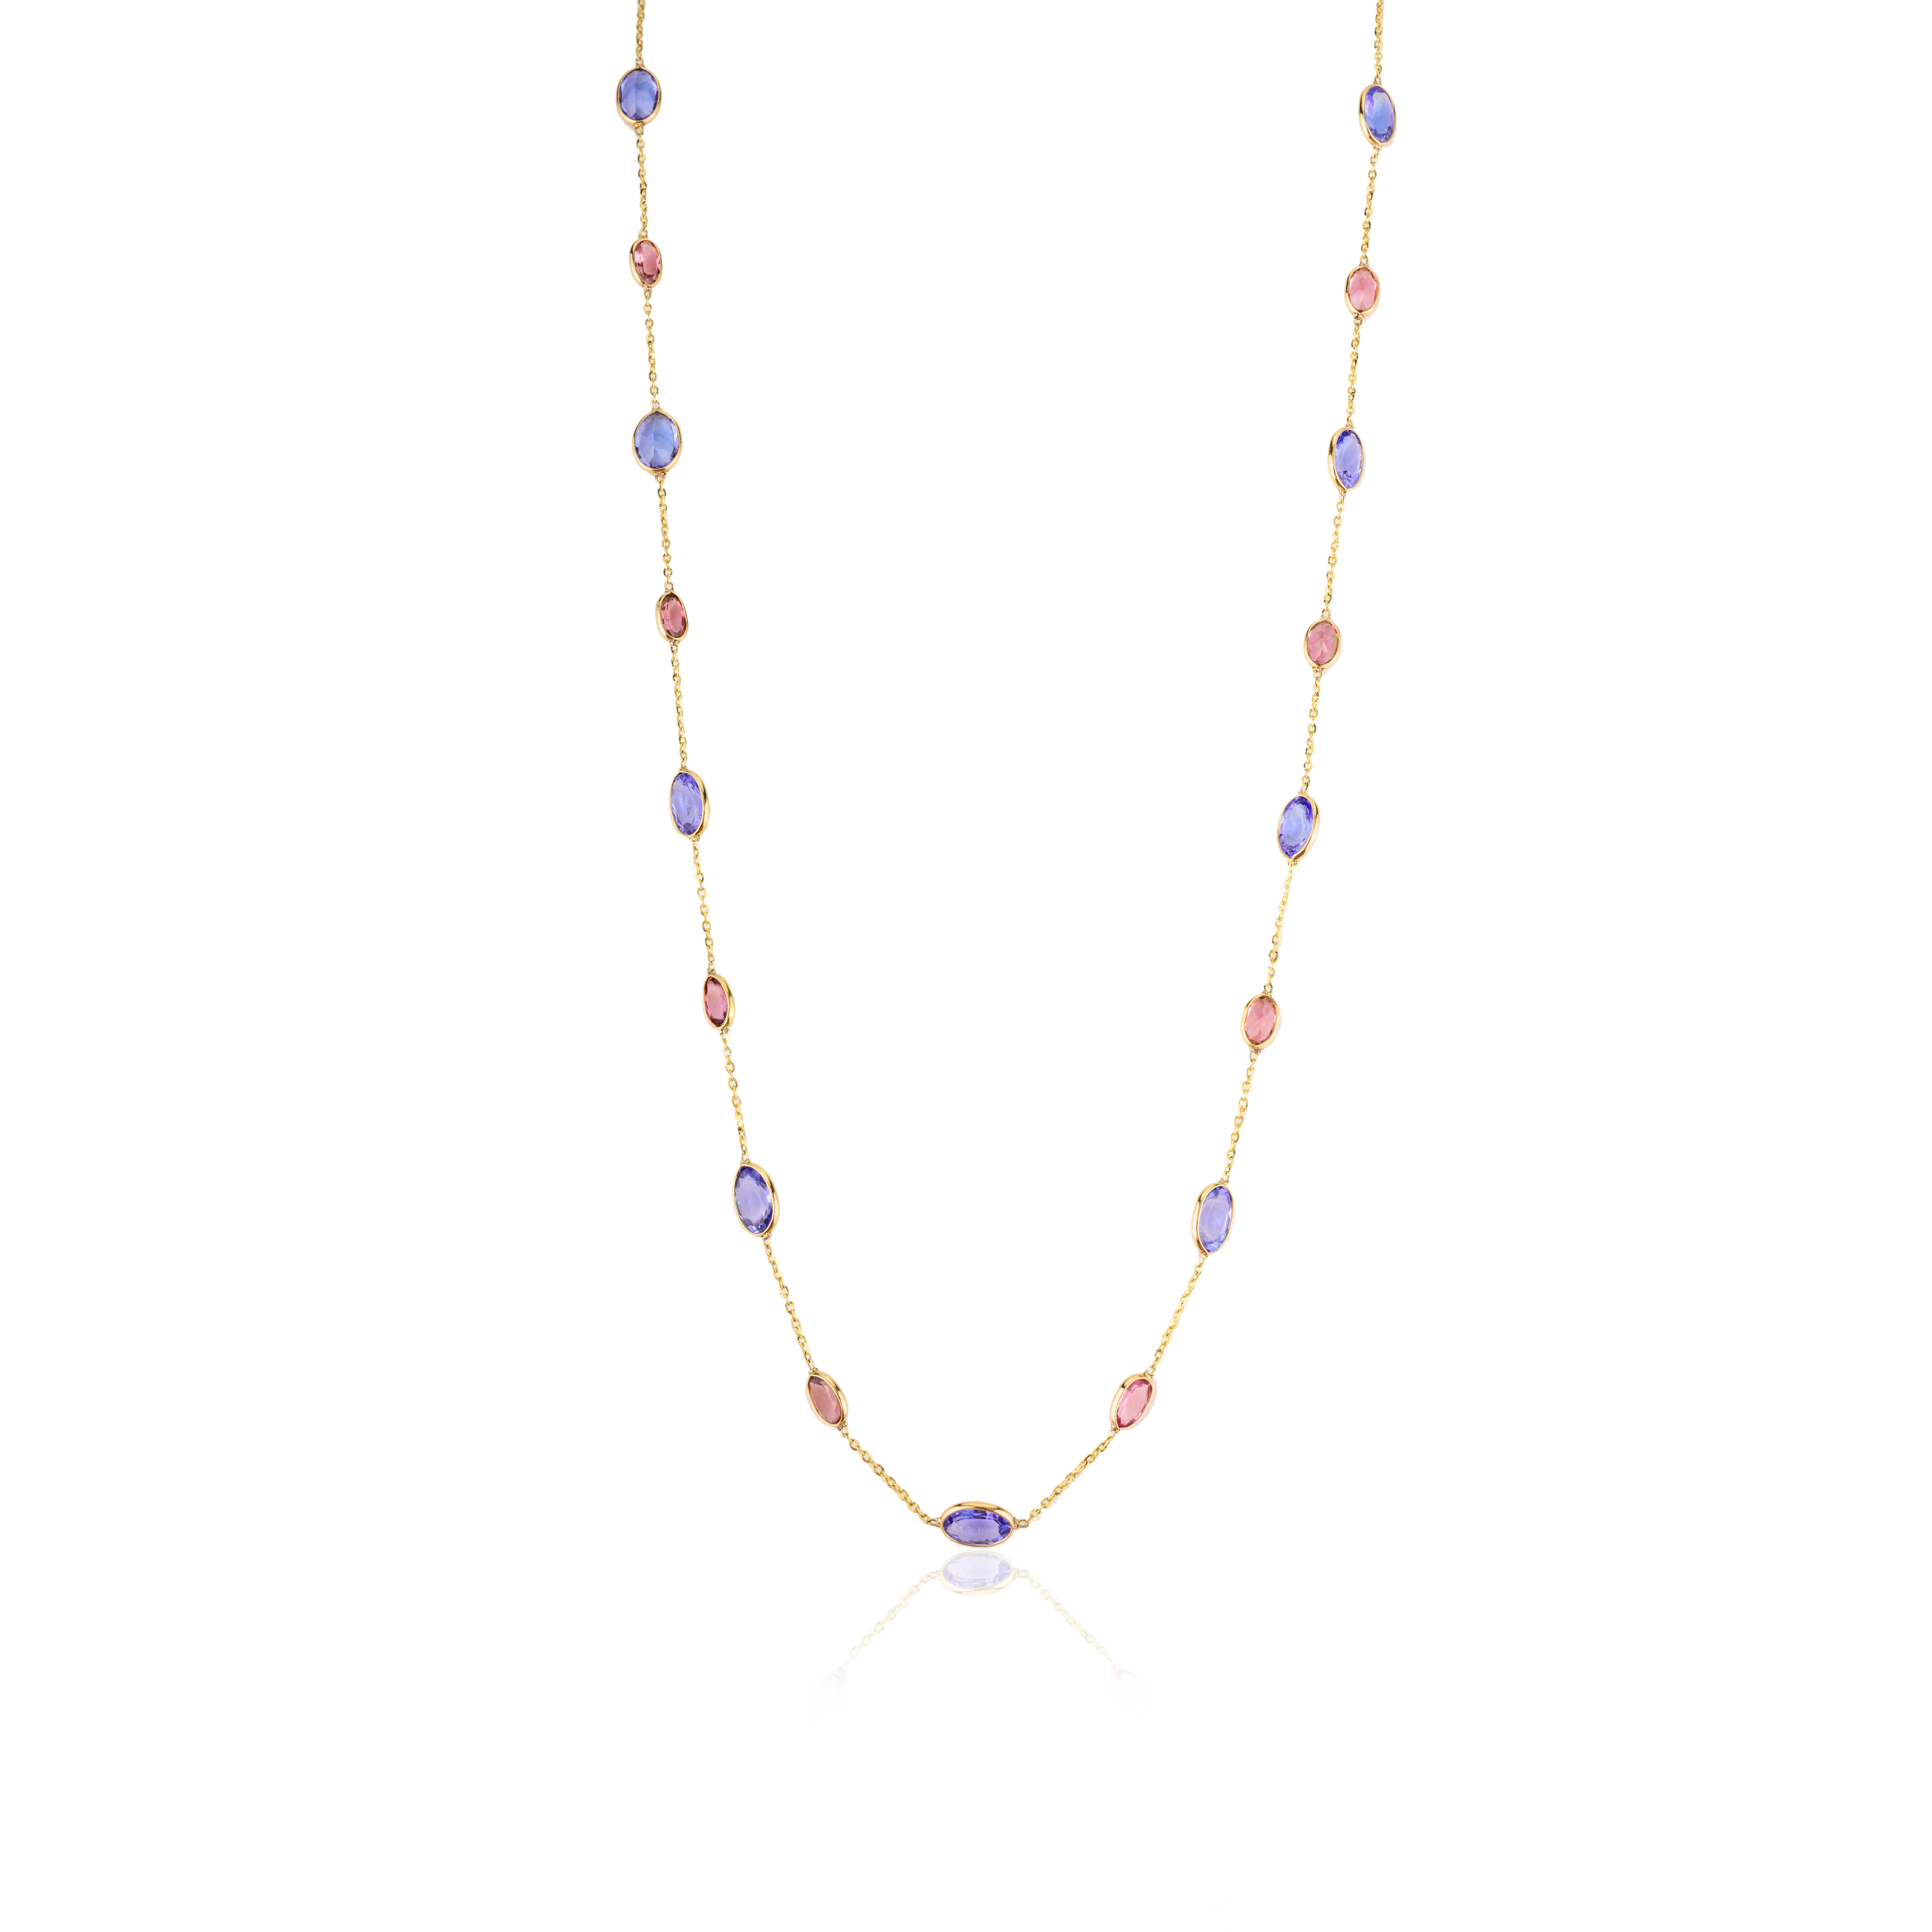 Unique Tanzanite and Tourmaline Station Necklace Crafted in 18k Yellow Gold In New Condition For Sale In Houston, TX